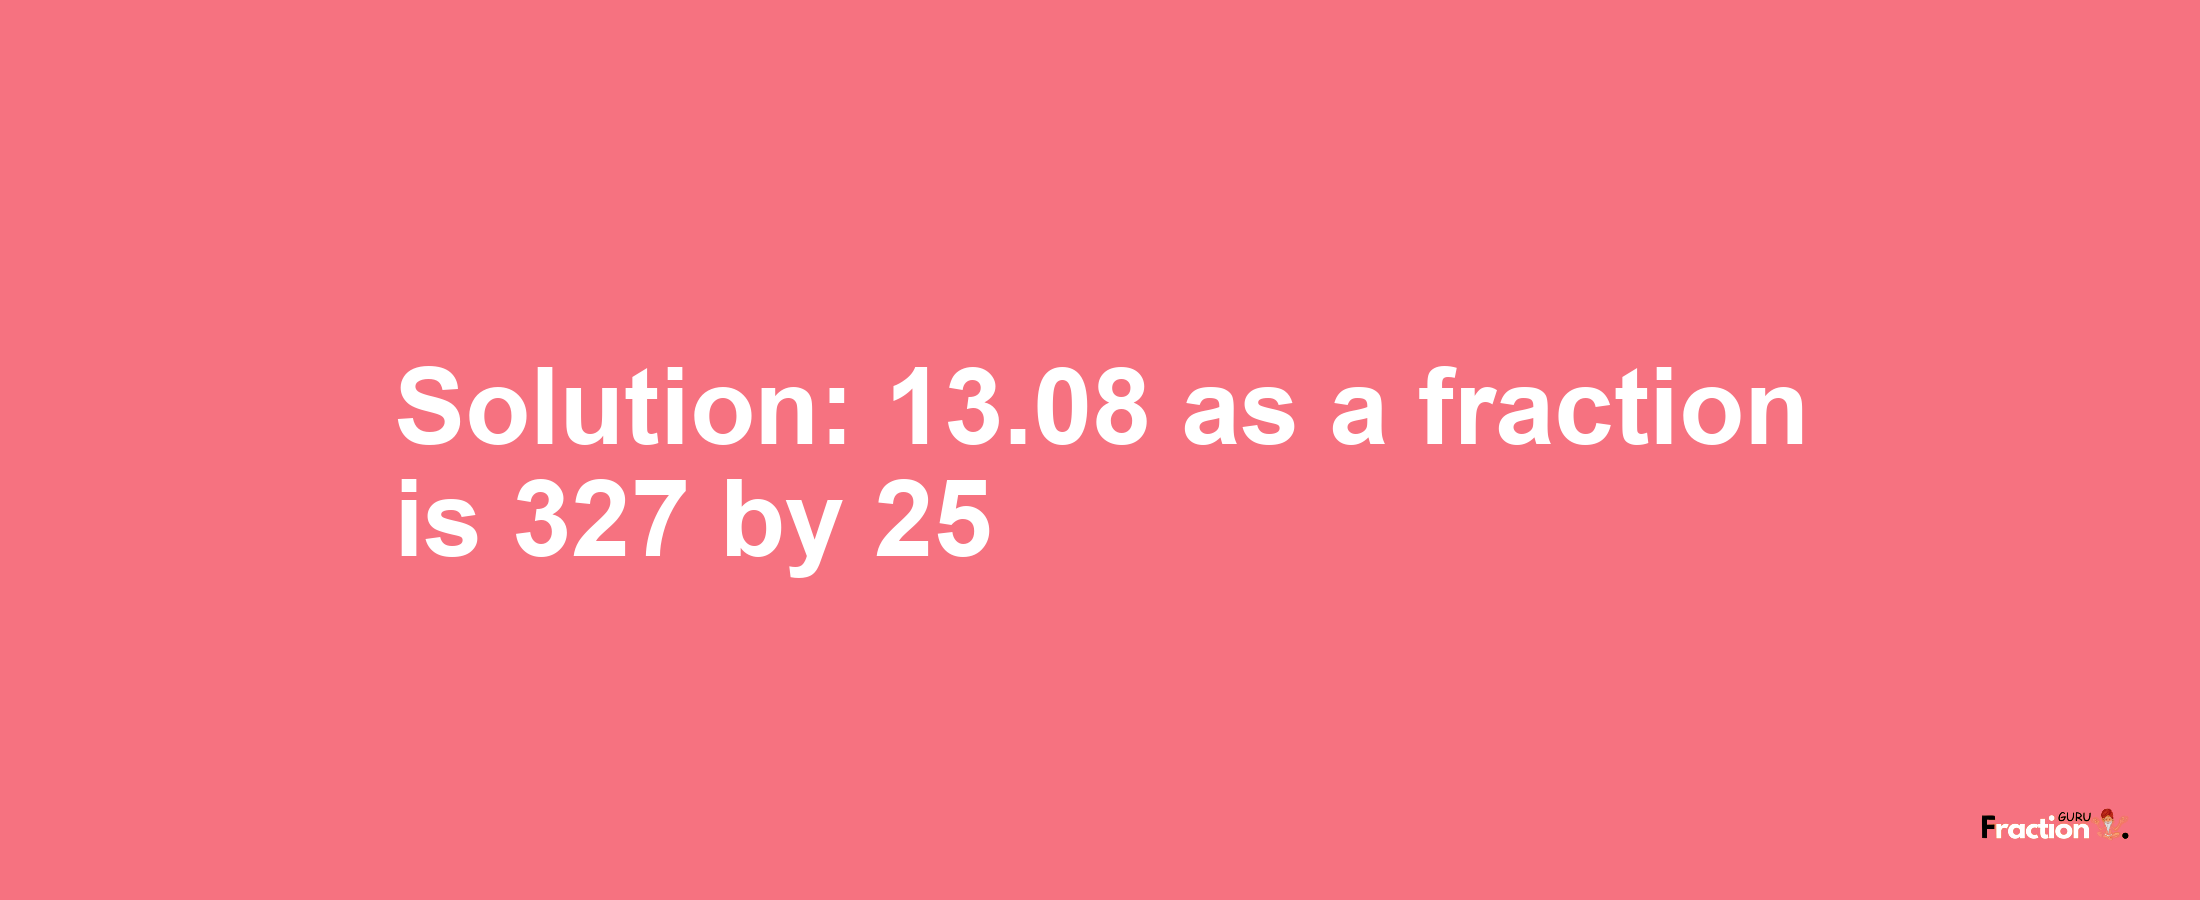 Solution:13.08 as a fraction is 327/25